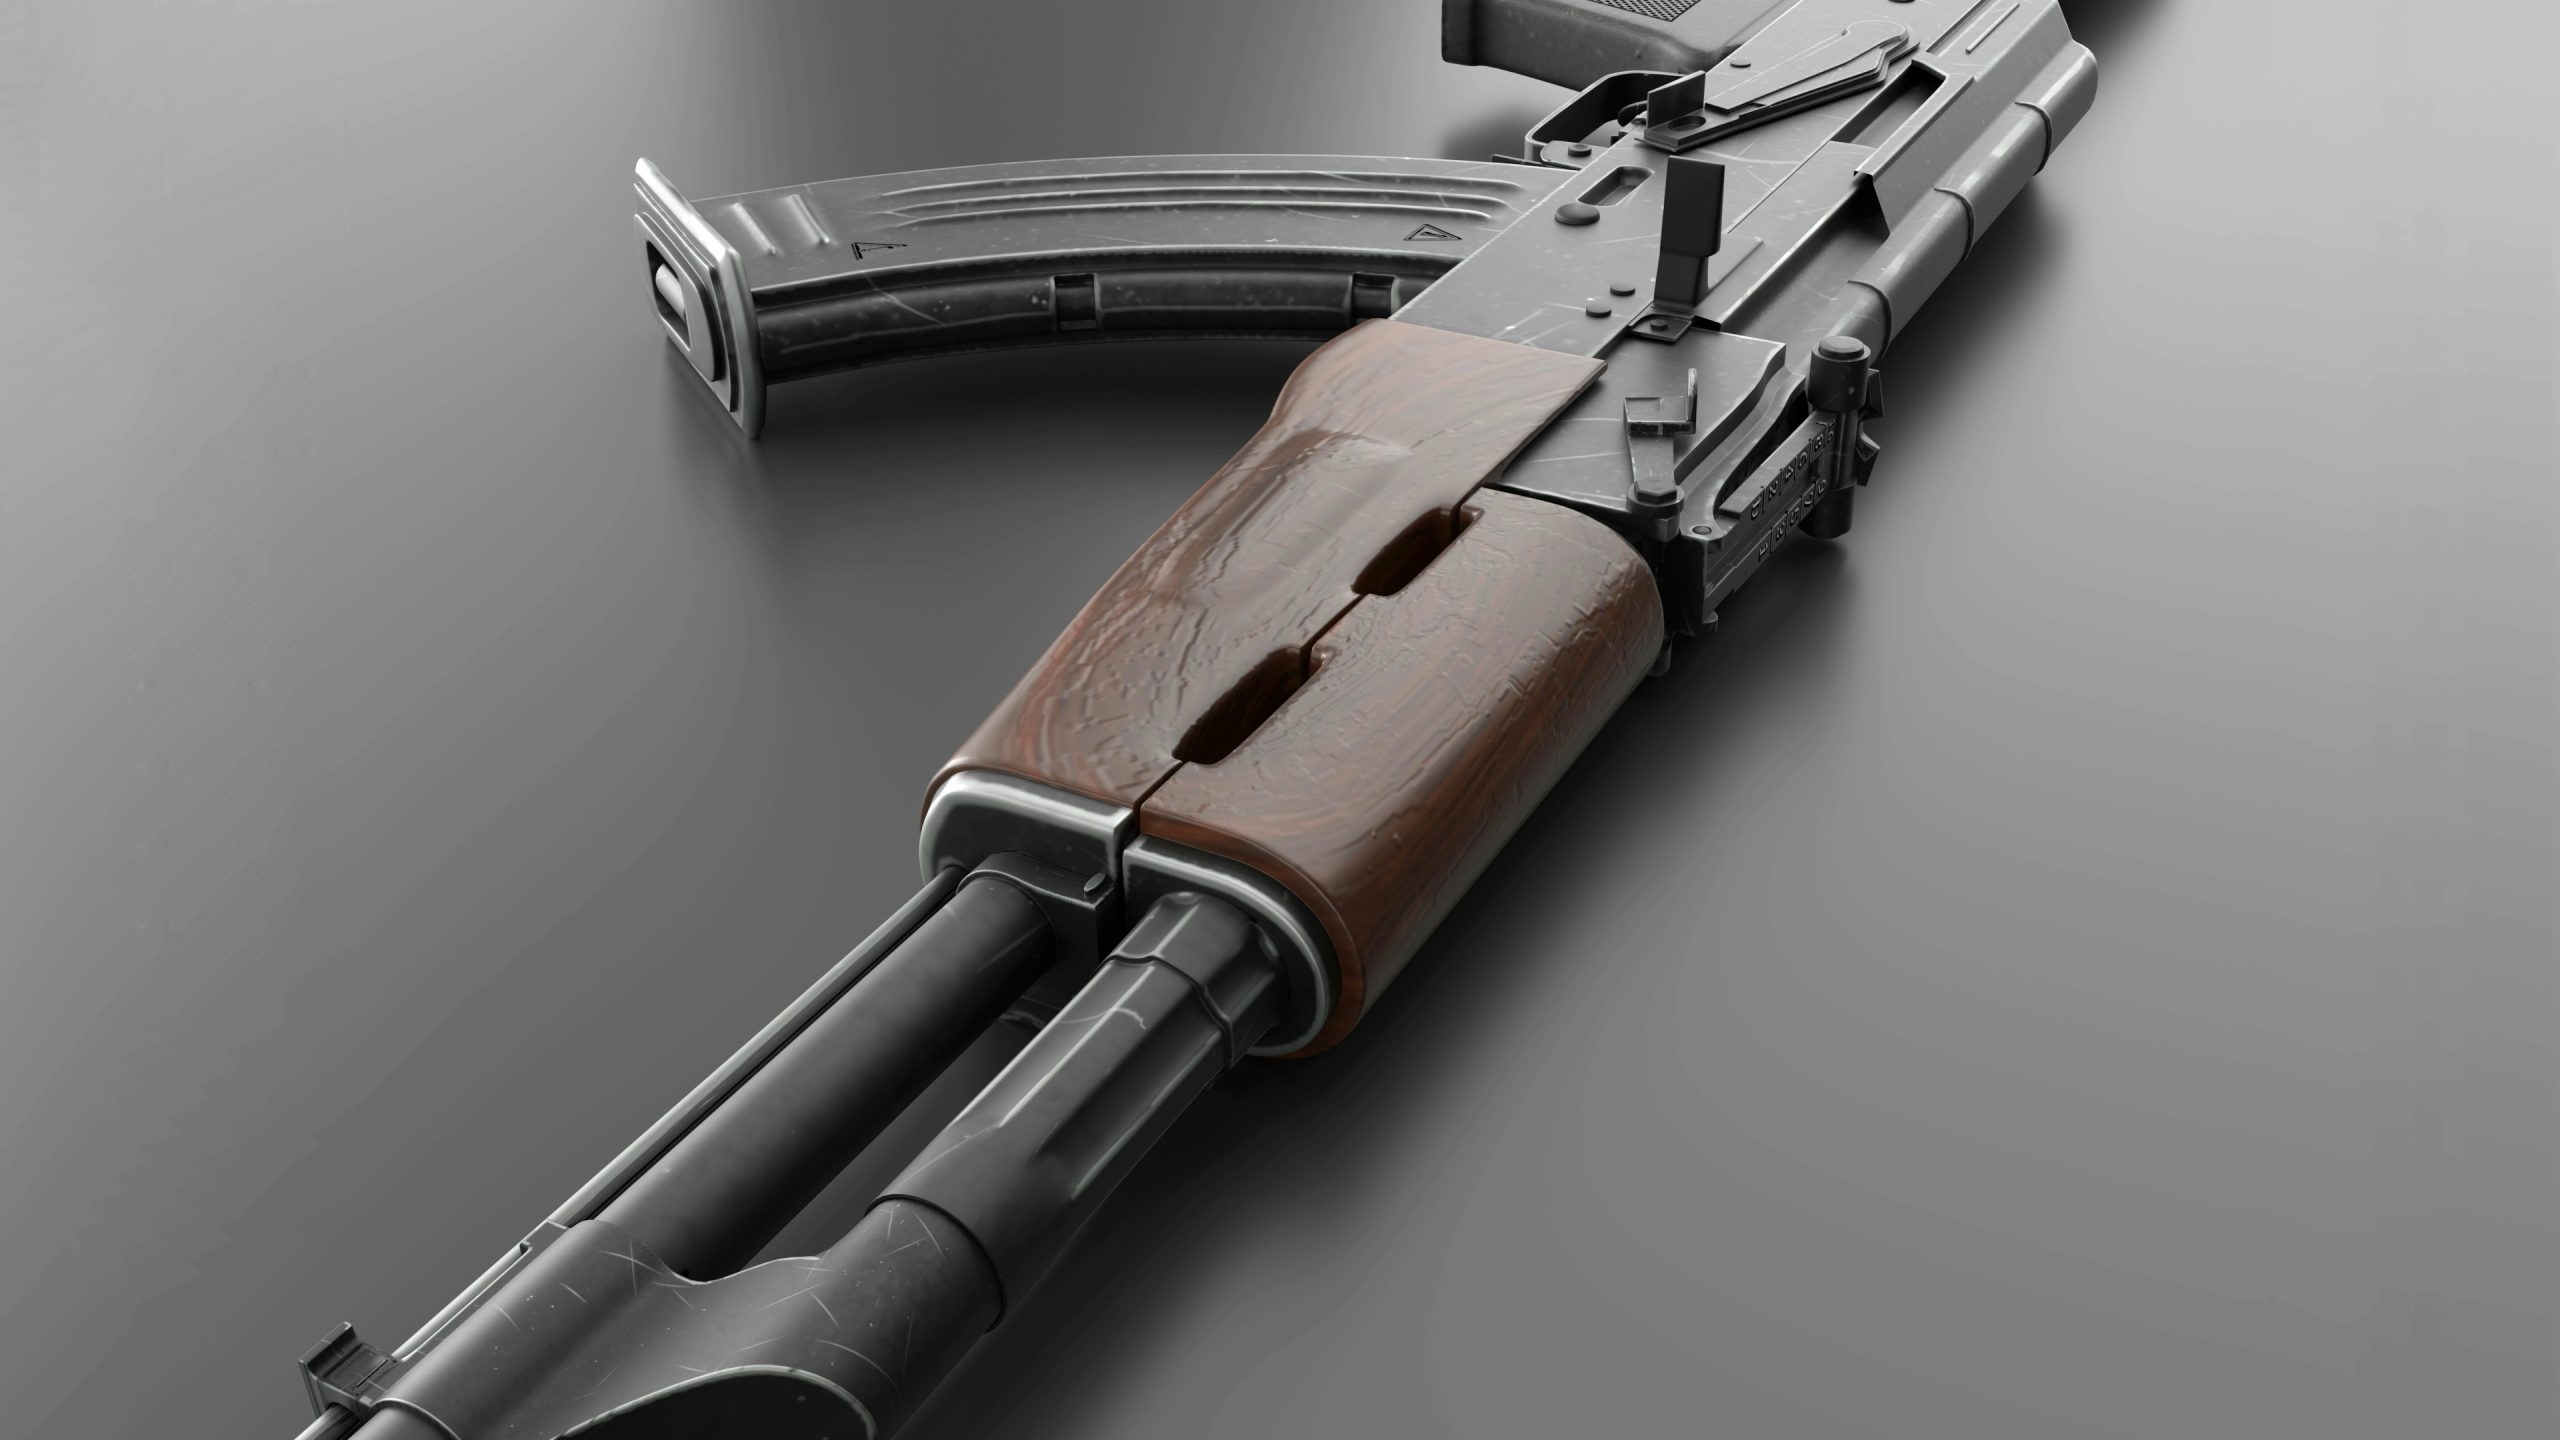 The AK-47: A Symbol of Power, Controversy, and Resilience